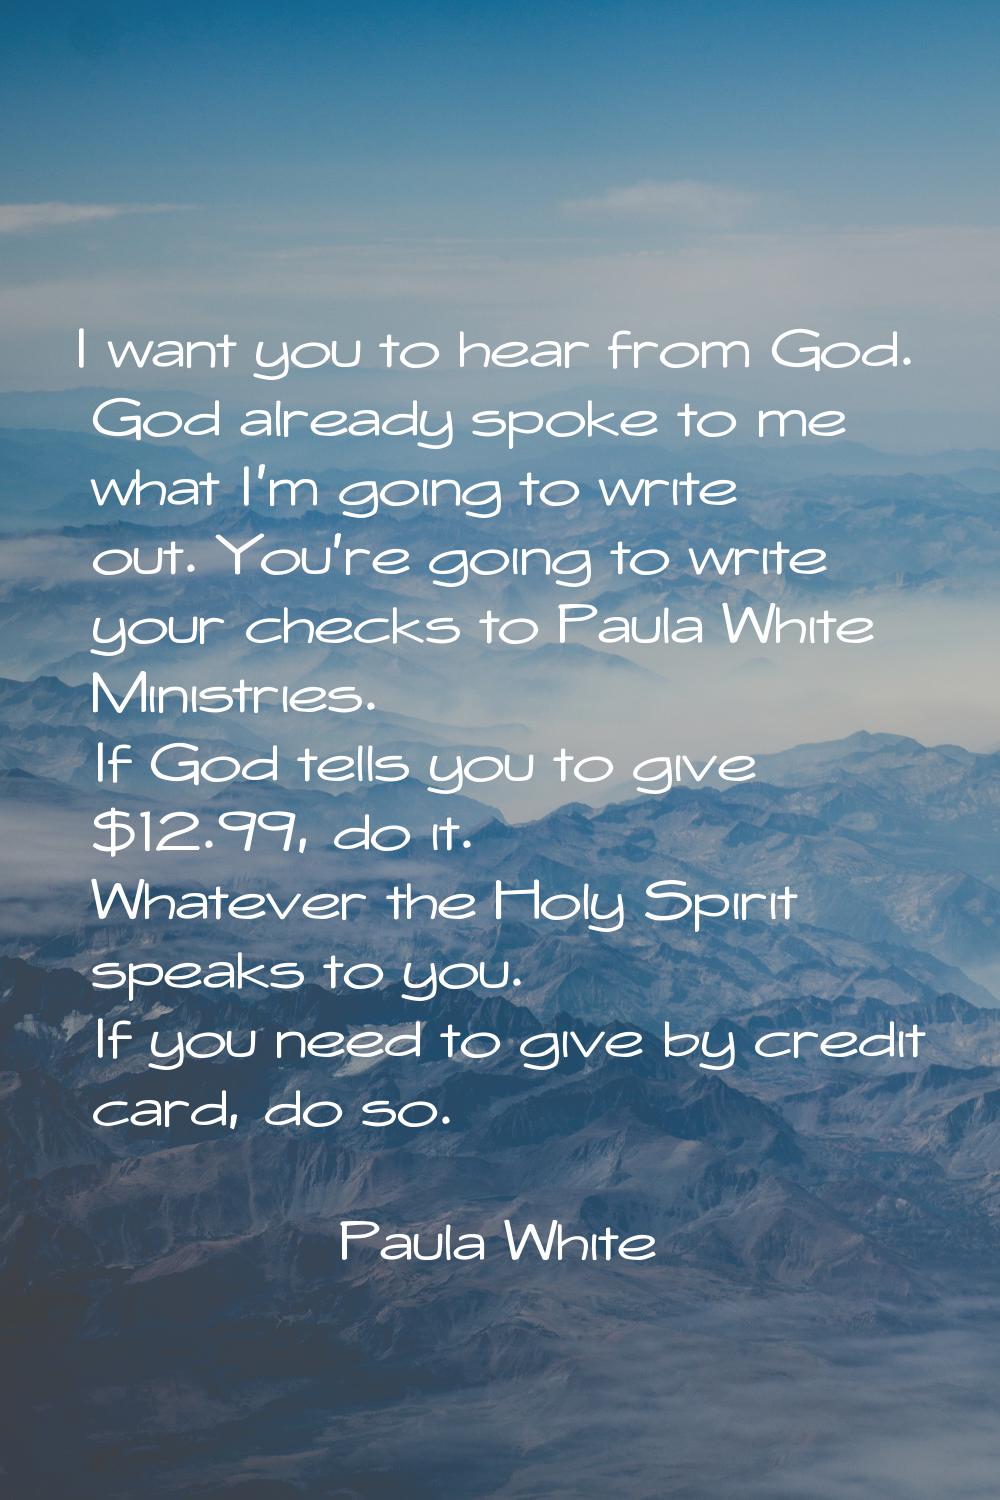 I want you to hear from God. God already spoke to me what I'm going to write out. You're going to w